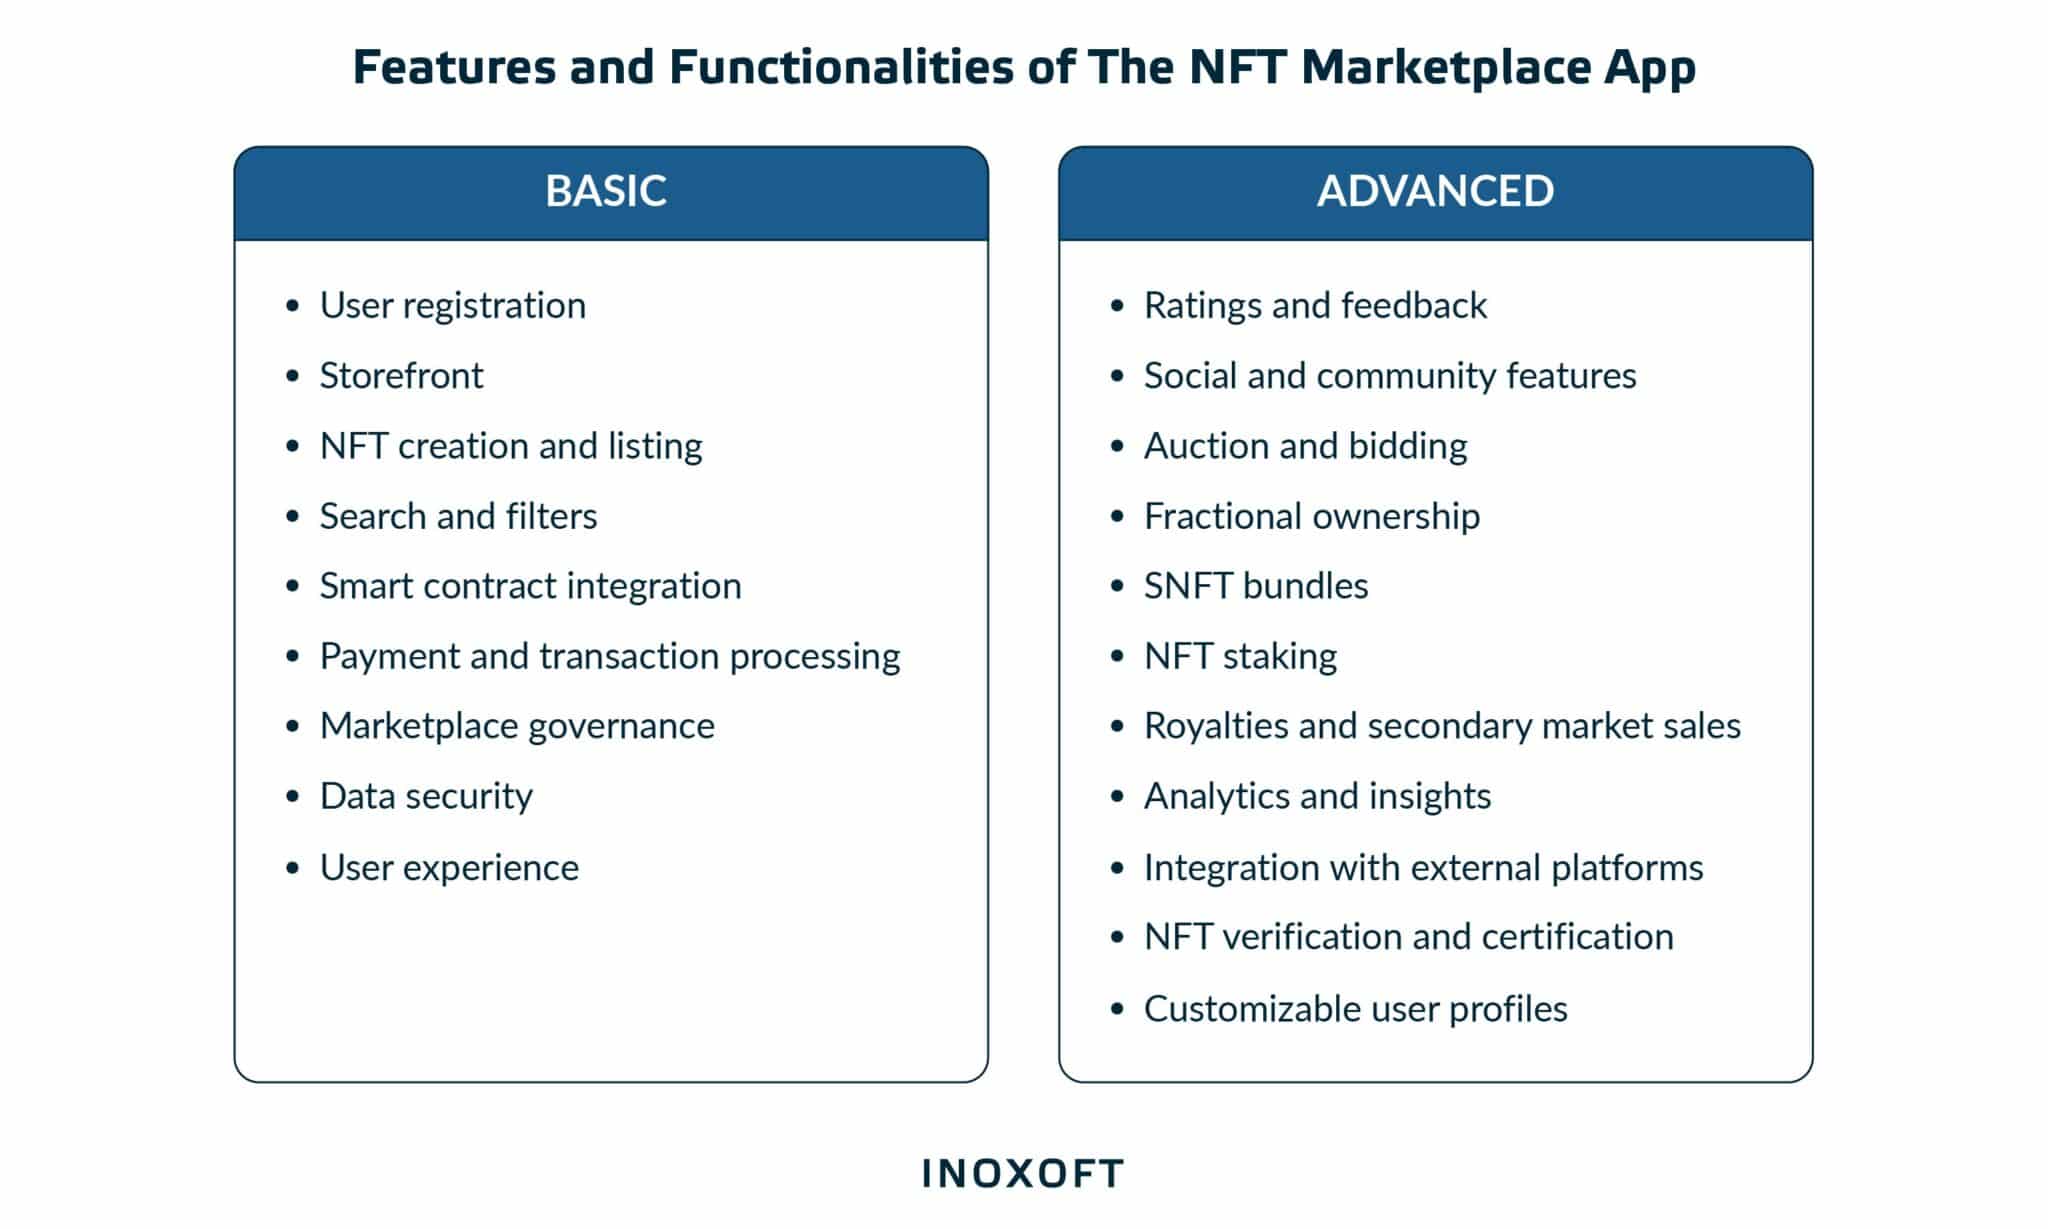 Features and functionalities of the NFT marketplace app